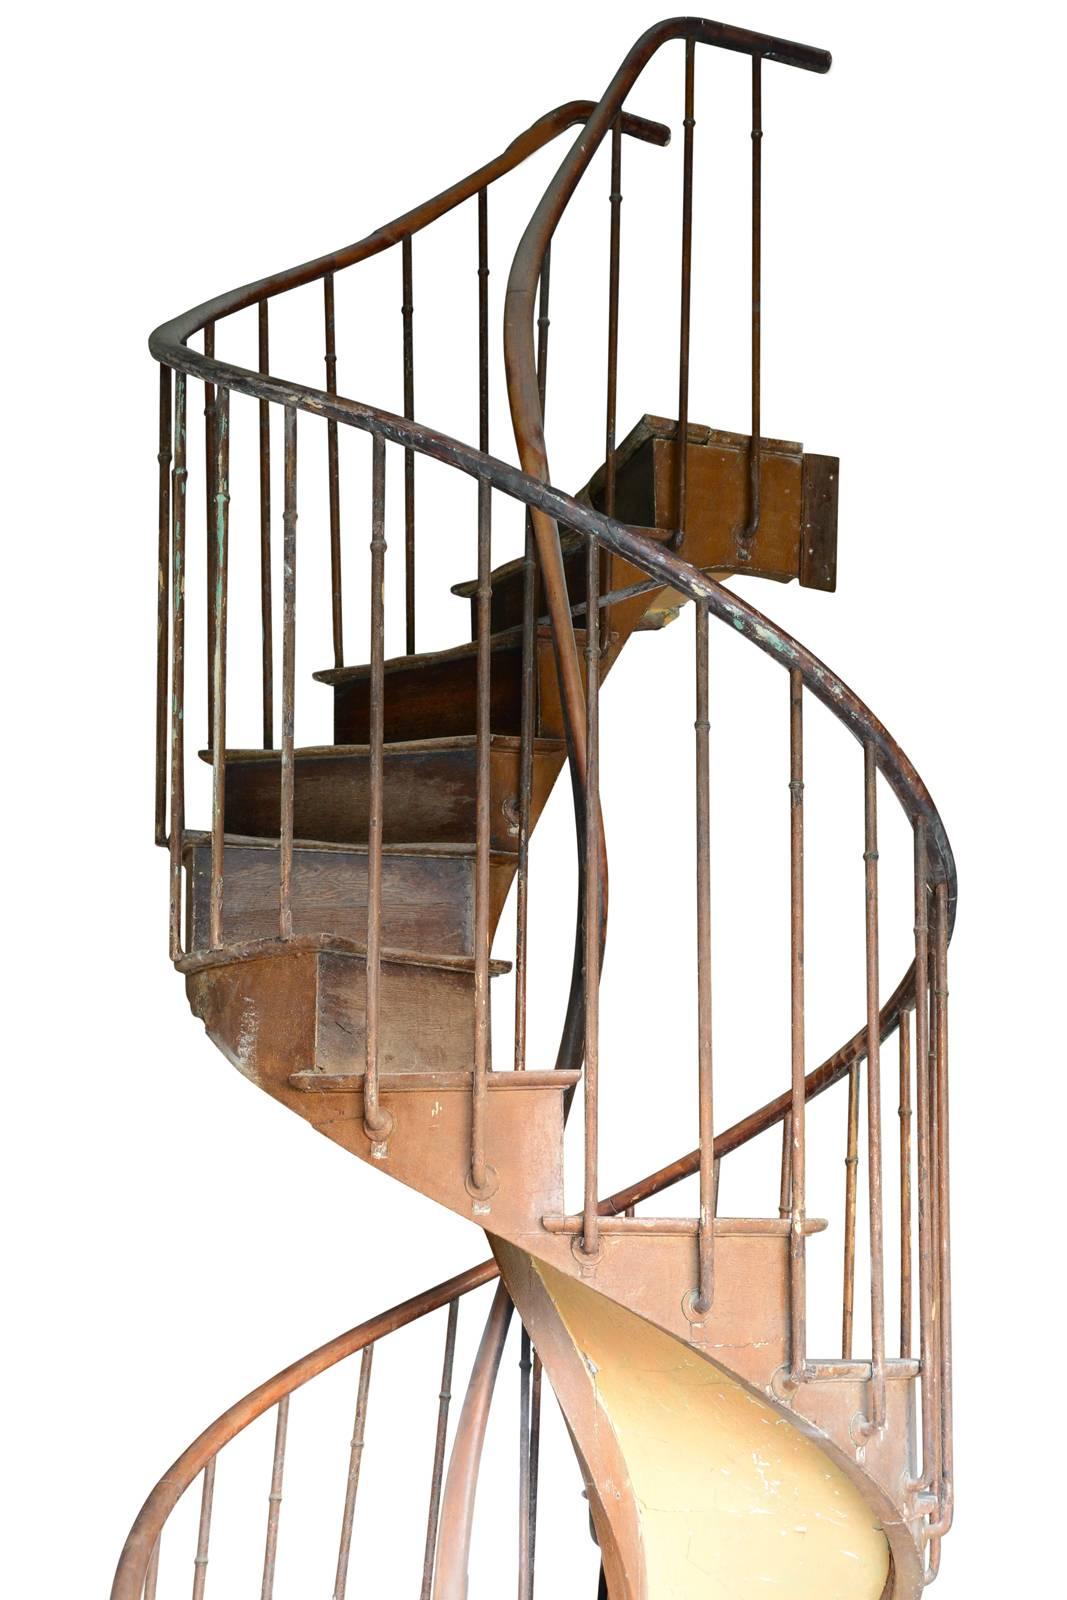 Spiral staircase dated from the 19th century in oak with 17 steps.
Measures:
Height of the last step: 137.8 in
Height of the ramp: 173.2 in.